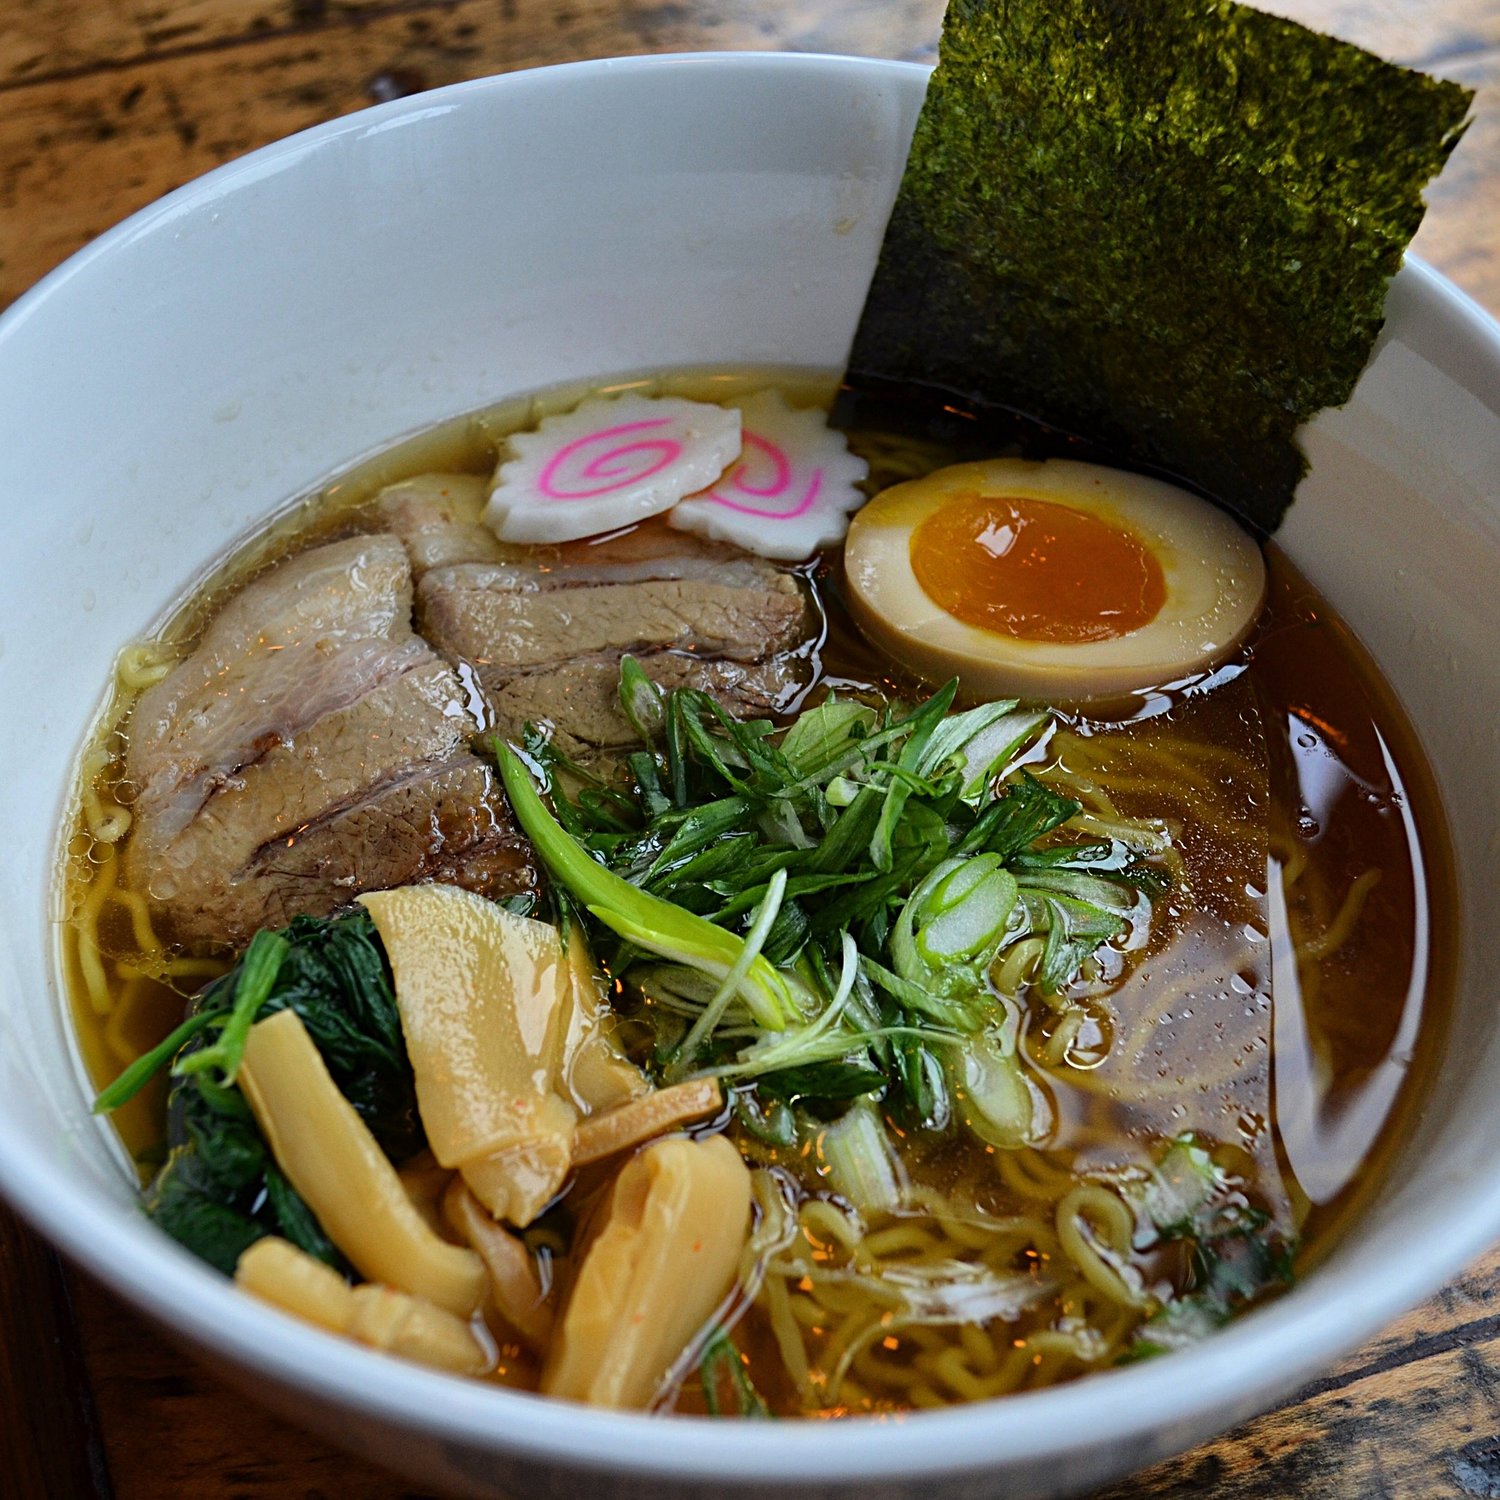 Looking for places to eat ramen near west loop?